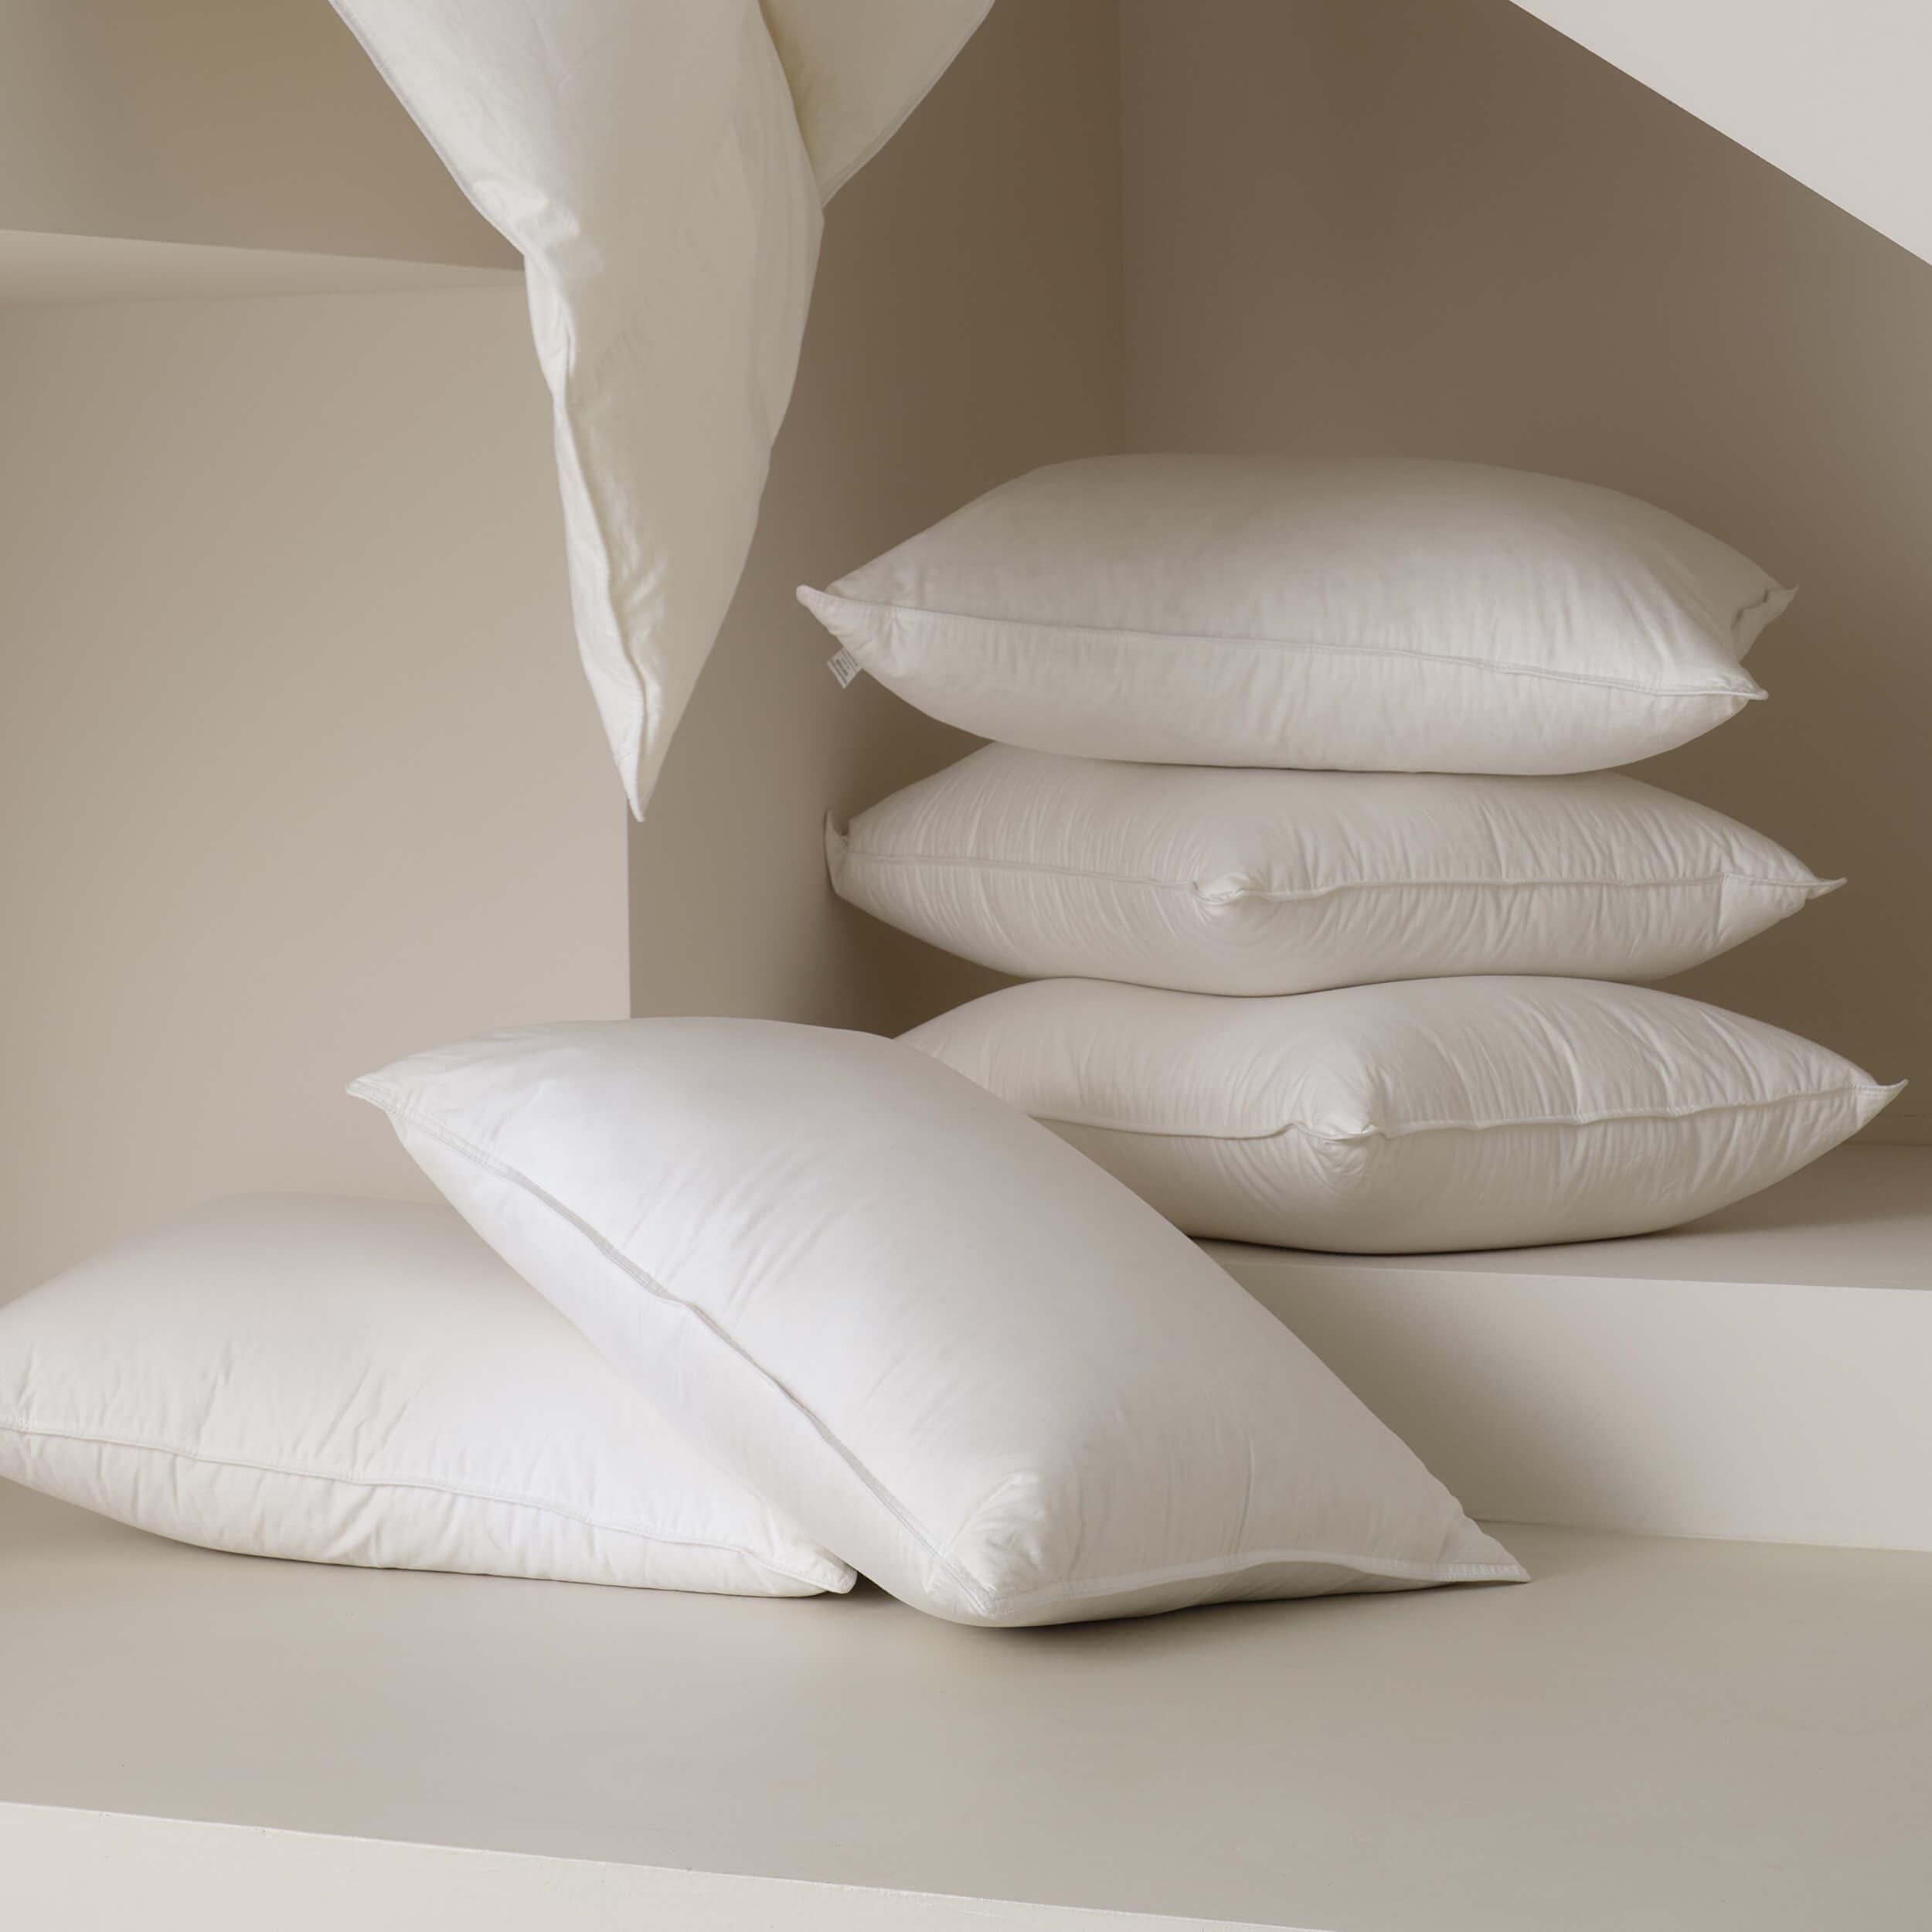 The white down pillow provides the perfect balance of softness and firmness for optimal neck and head support.